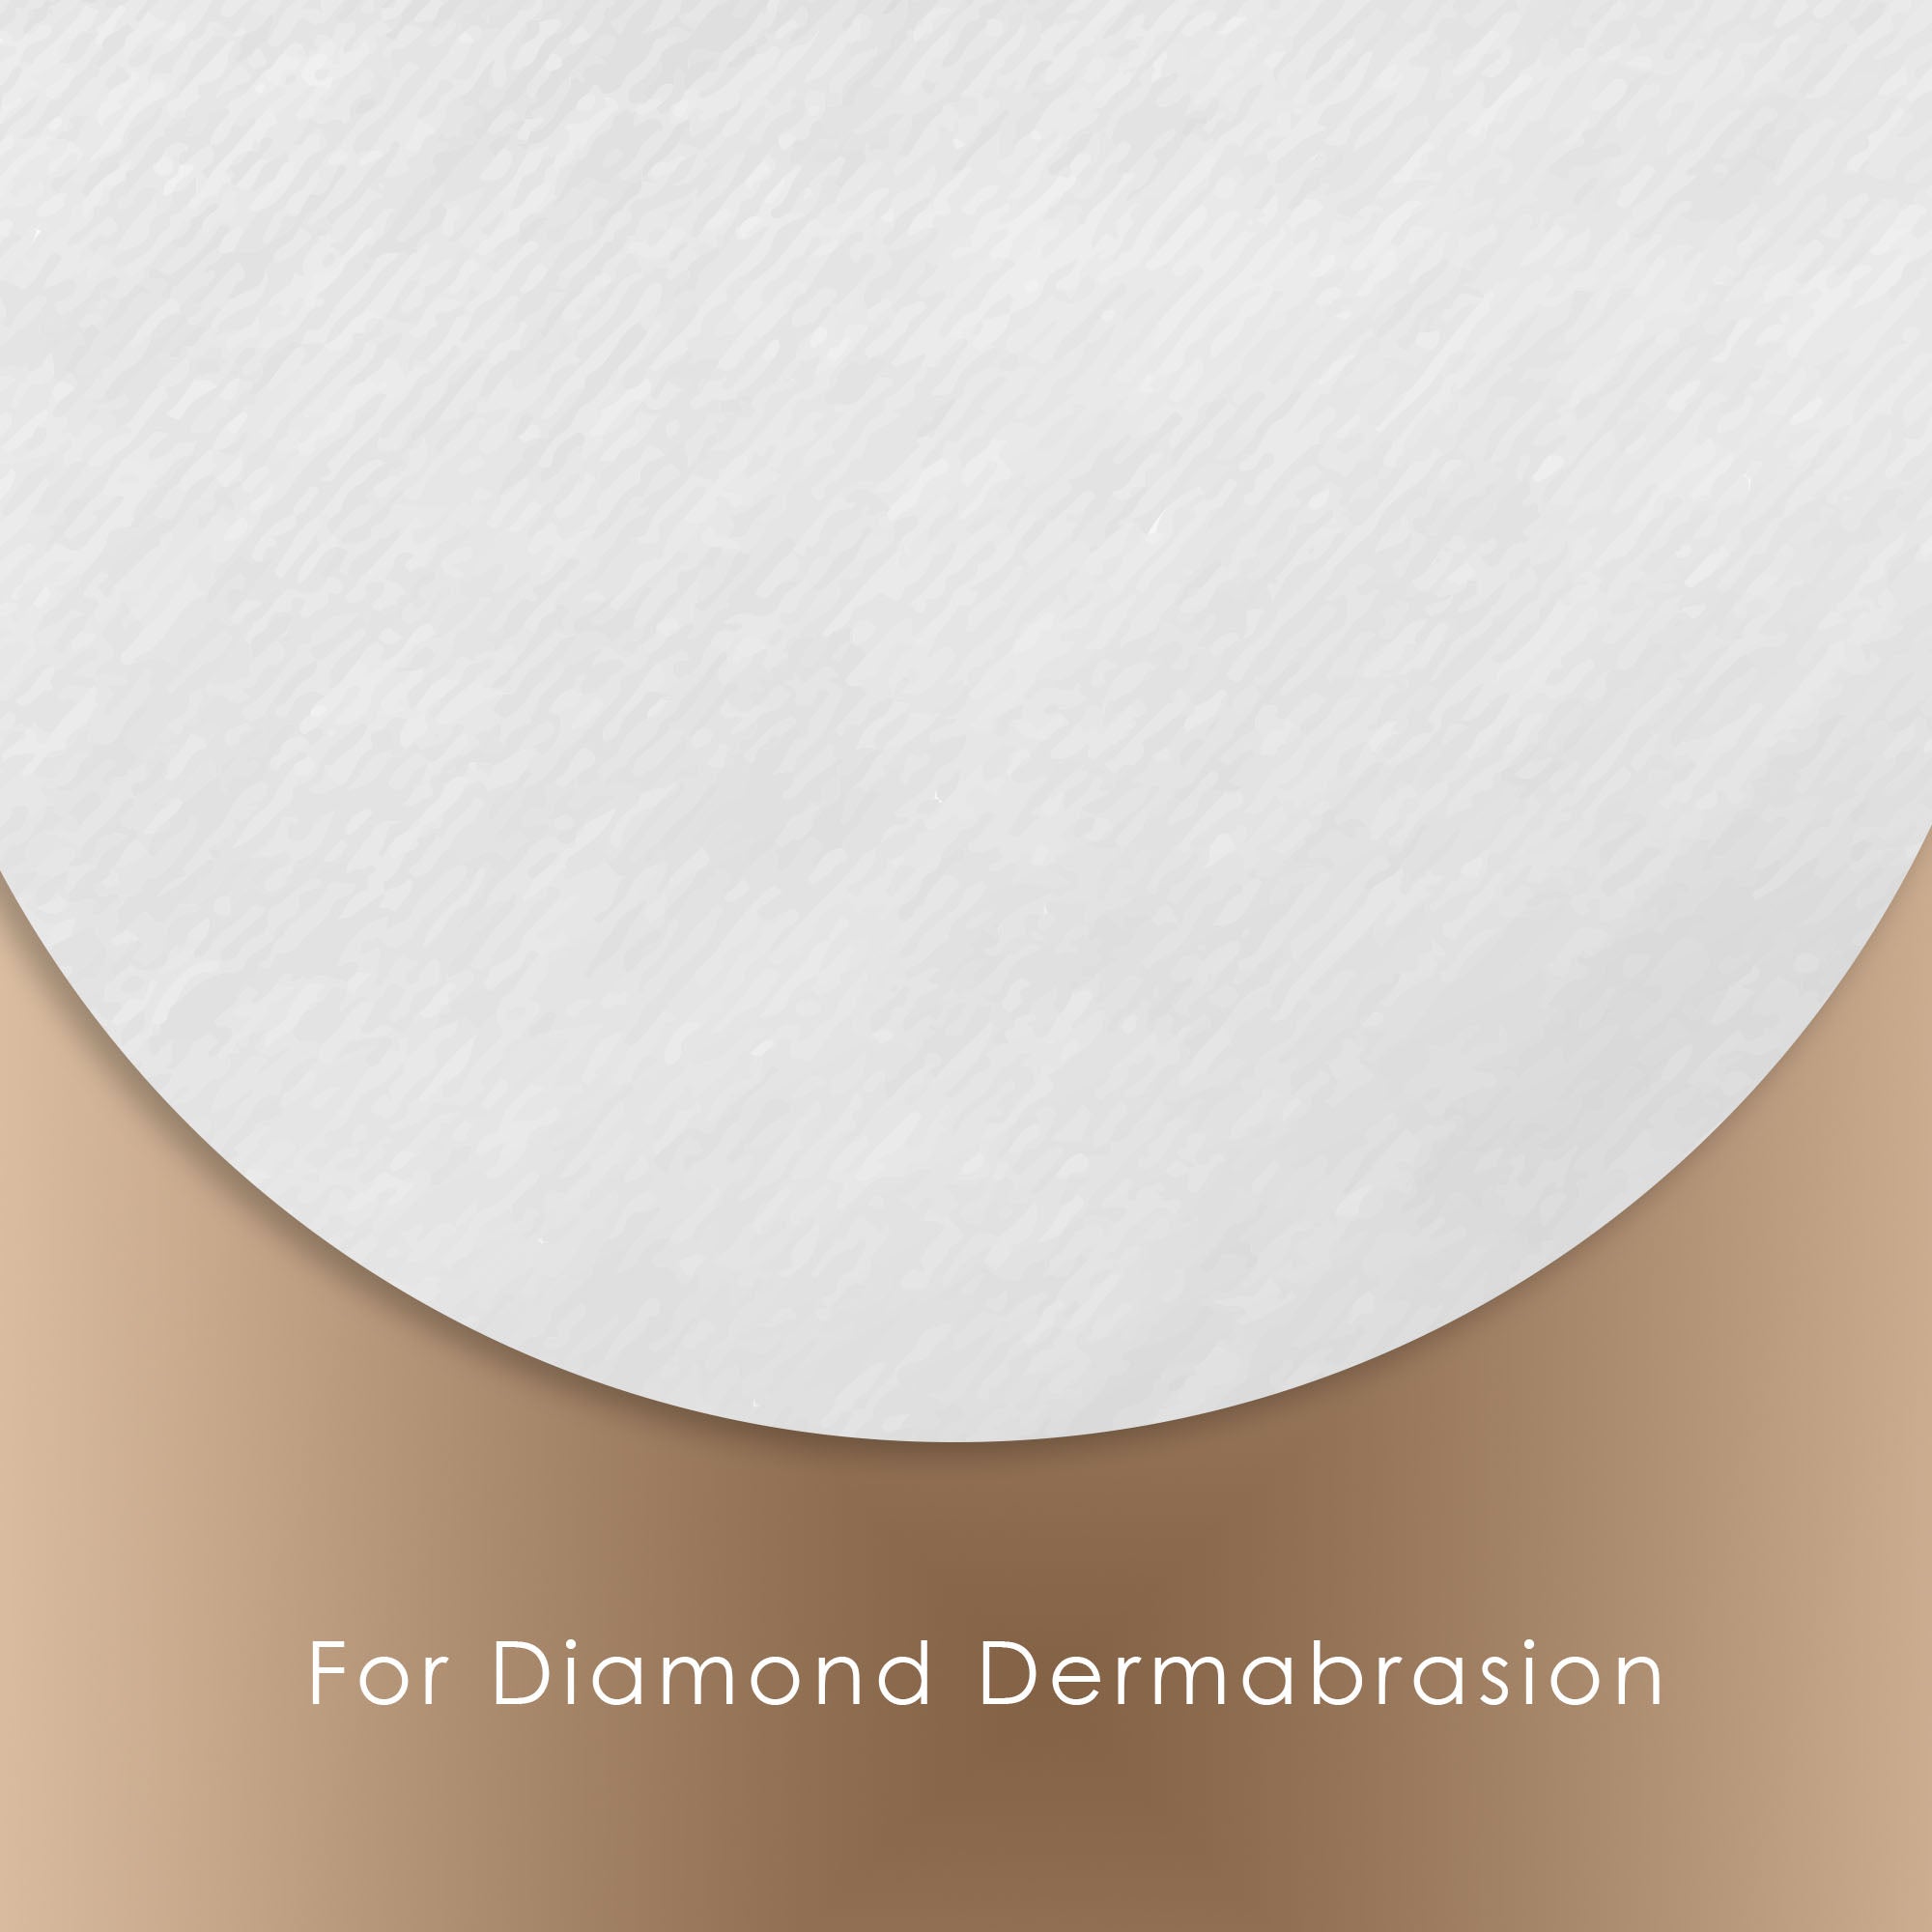 500pcs Microdermabrasion Replacement Filters | 11mm Cotton Rounds for Diamond Peel - Project E Beauty